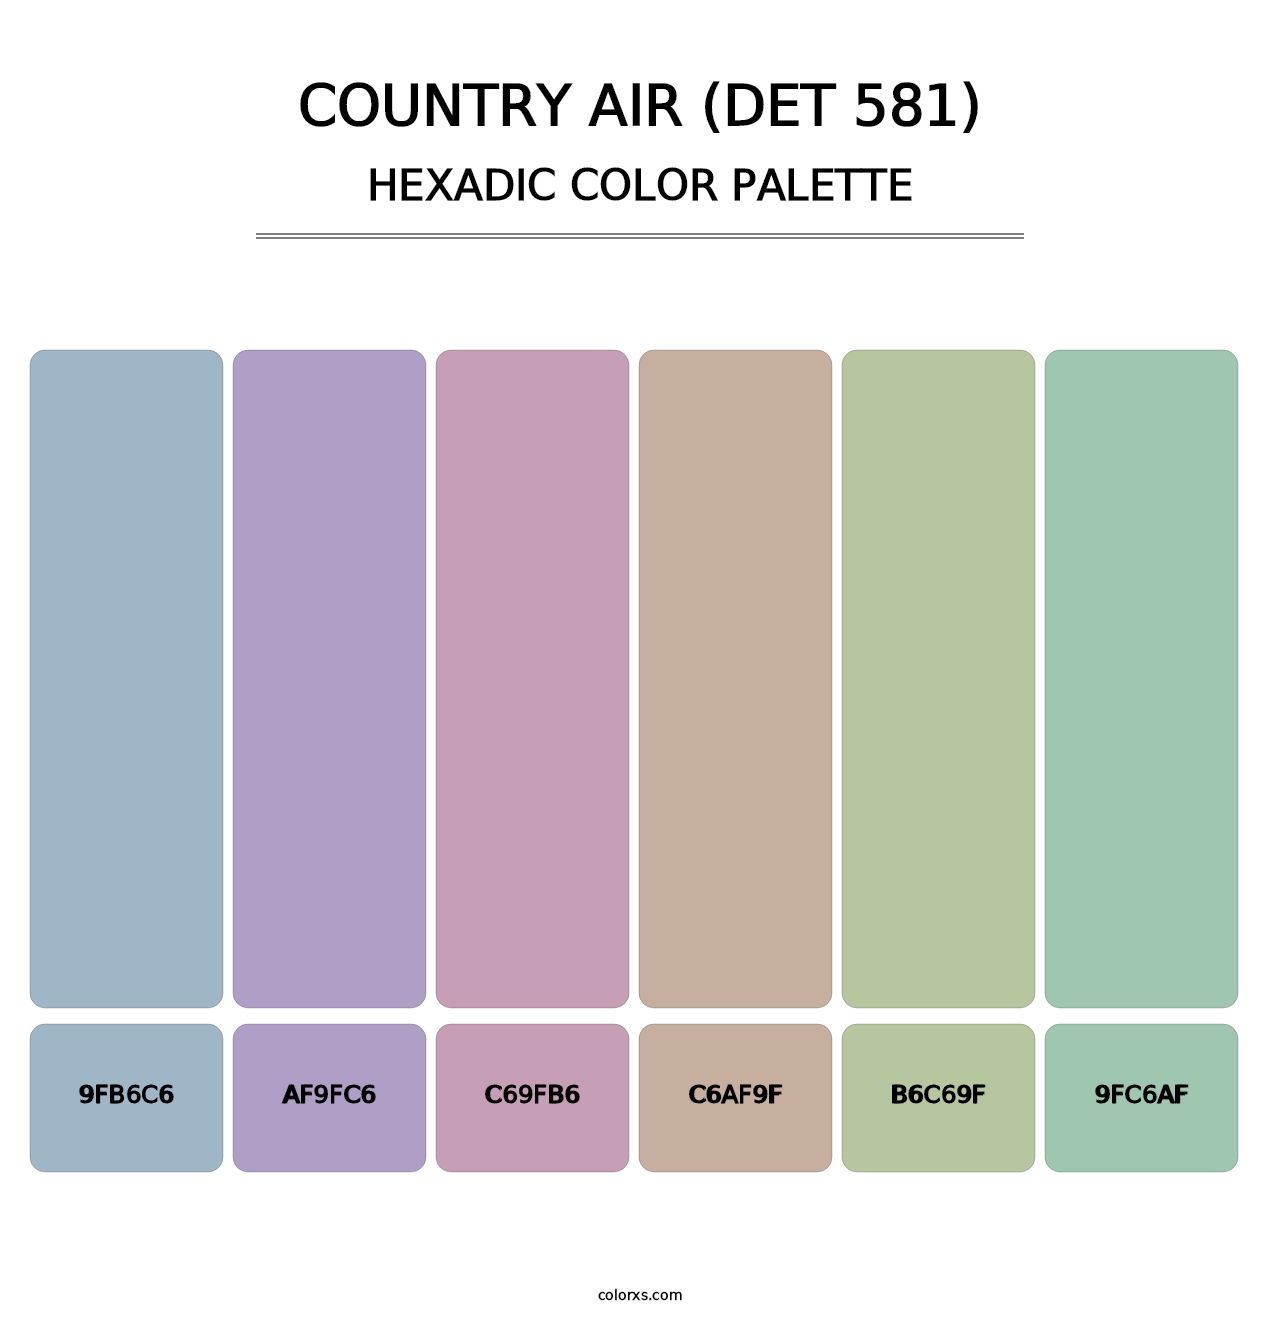 Country Air (DET 581) - Hexadic Color Palette